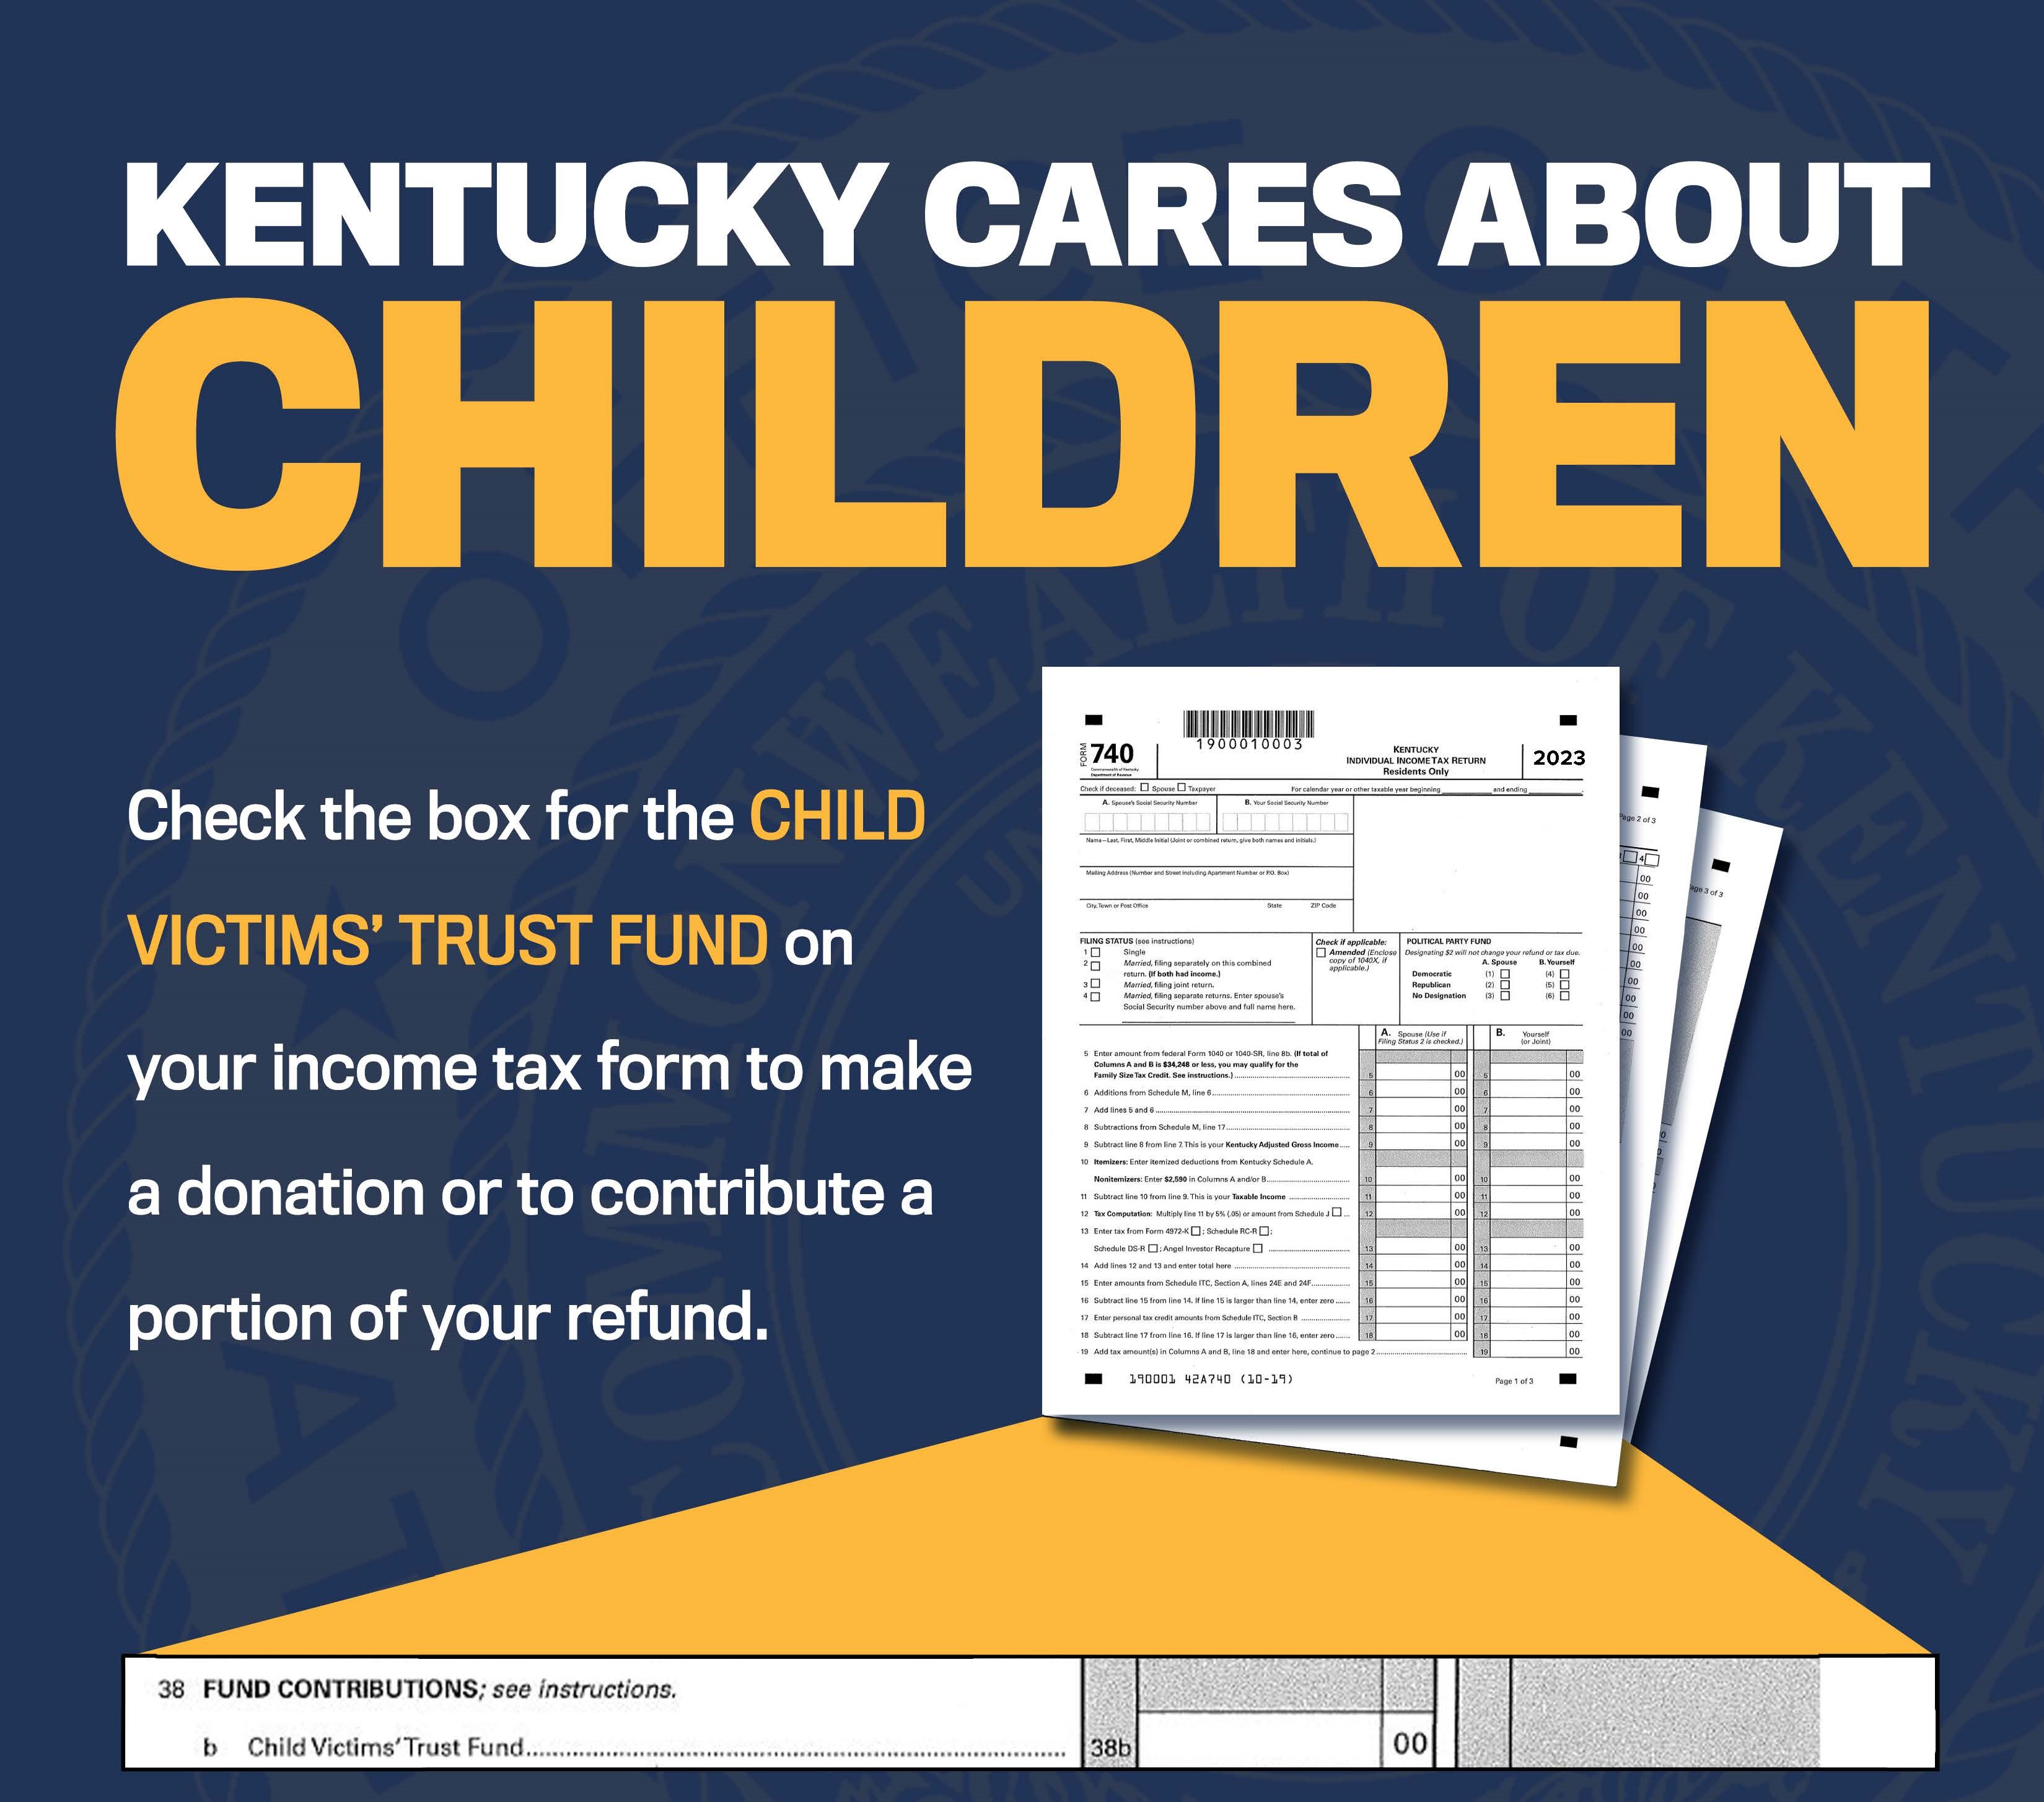 KENTUCKY CARES ABOUT CHILDREN Check the box for the CHILD VICTIMS TRUST FUND on your income tax form to make a donation or to contribute a portion of your refund. You can also contribute by making a direct donation at icareaboutkids.ky.gov, or by purchasing the I CARE ABOUT KIDS license plate. Ask your local County Clerk when renewing your vehicle tags The Kentucky Child Victims Trust Fund (CVTF) provides funding for child sexual abuse prevention programs that utilize innovative strategies to pr